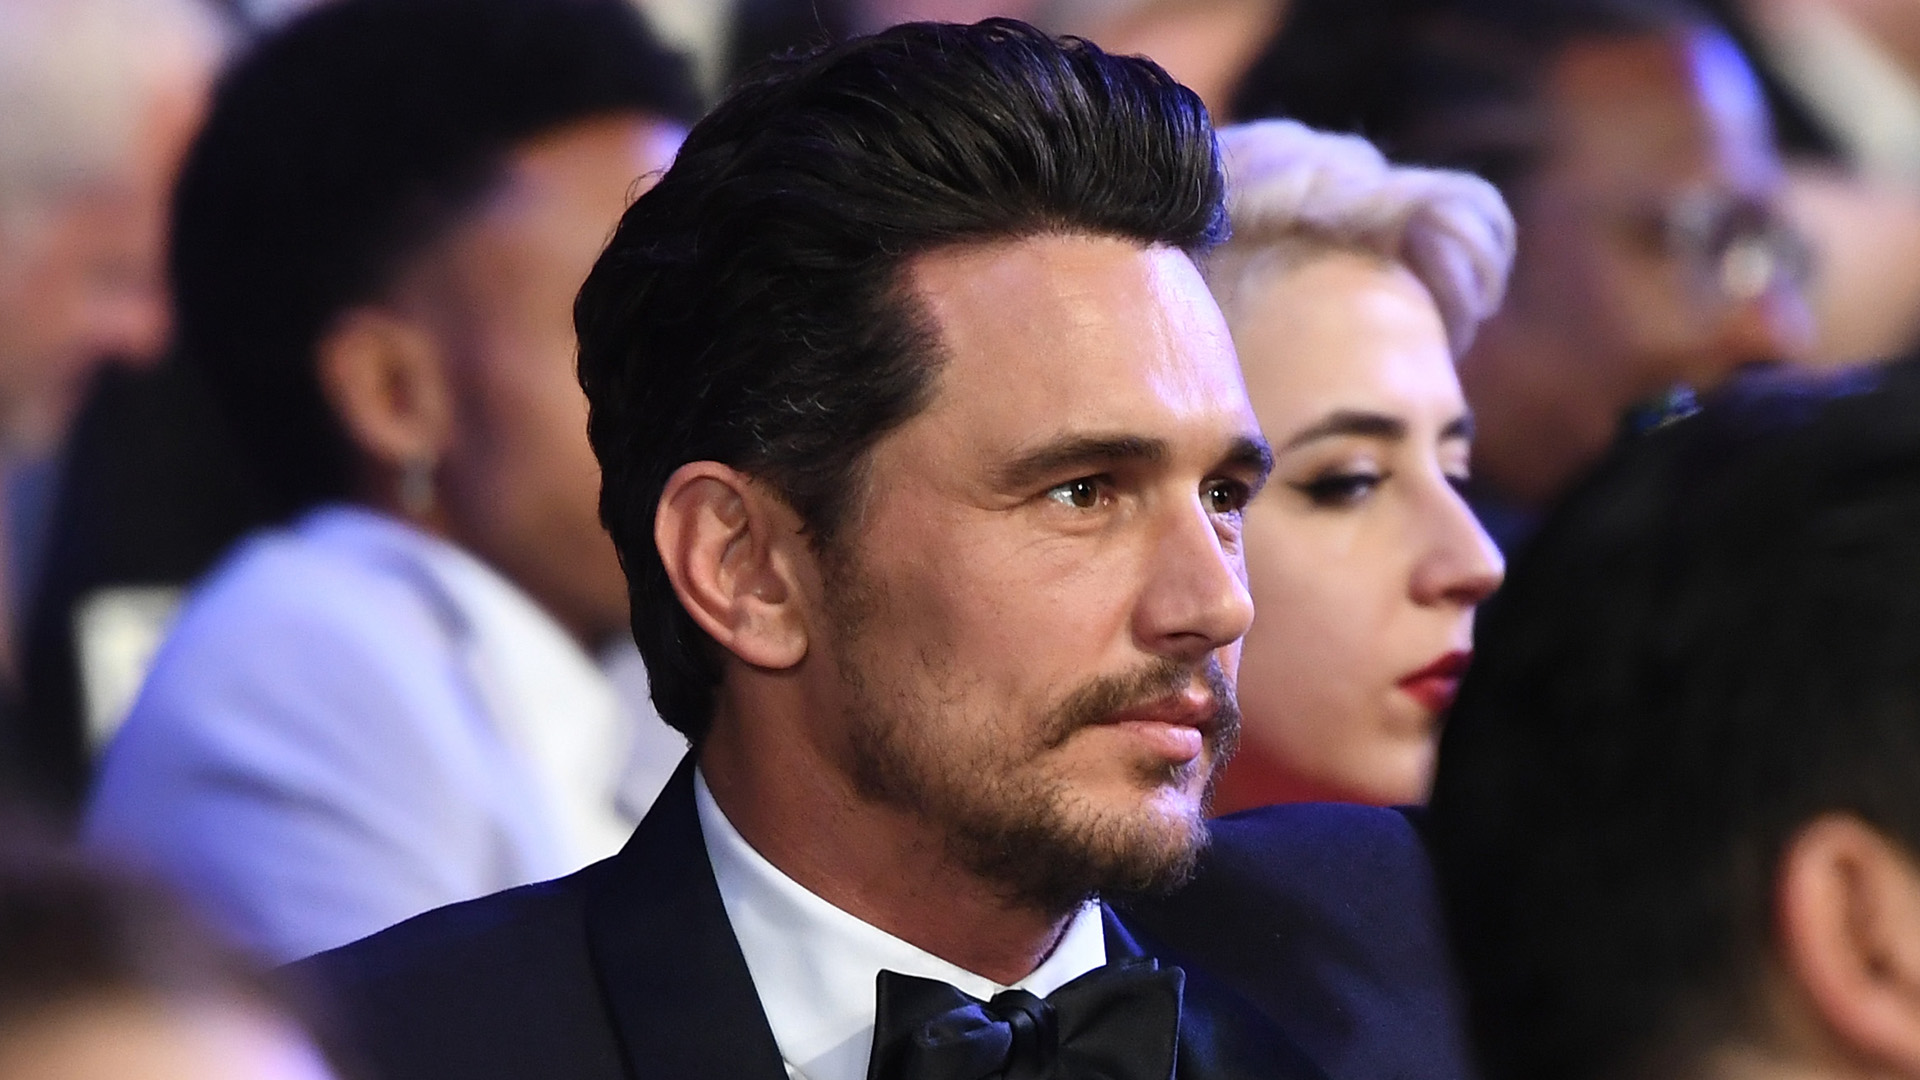 LOS ANGELES, CA - JANUARY 21:  Actor James Franco attends the 24th Annual Screen Actors Guild Awards at The Shrine Auditorium on January 21, 2018 in Los Angeles, California. 27522_009  (Photo by Dimitrios Kambouris/Getty Images for Turner)